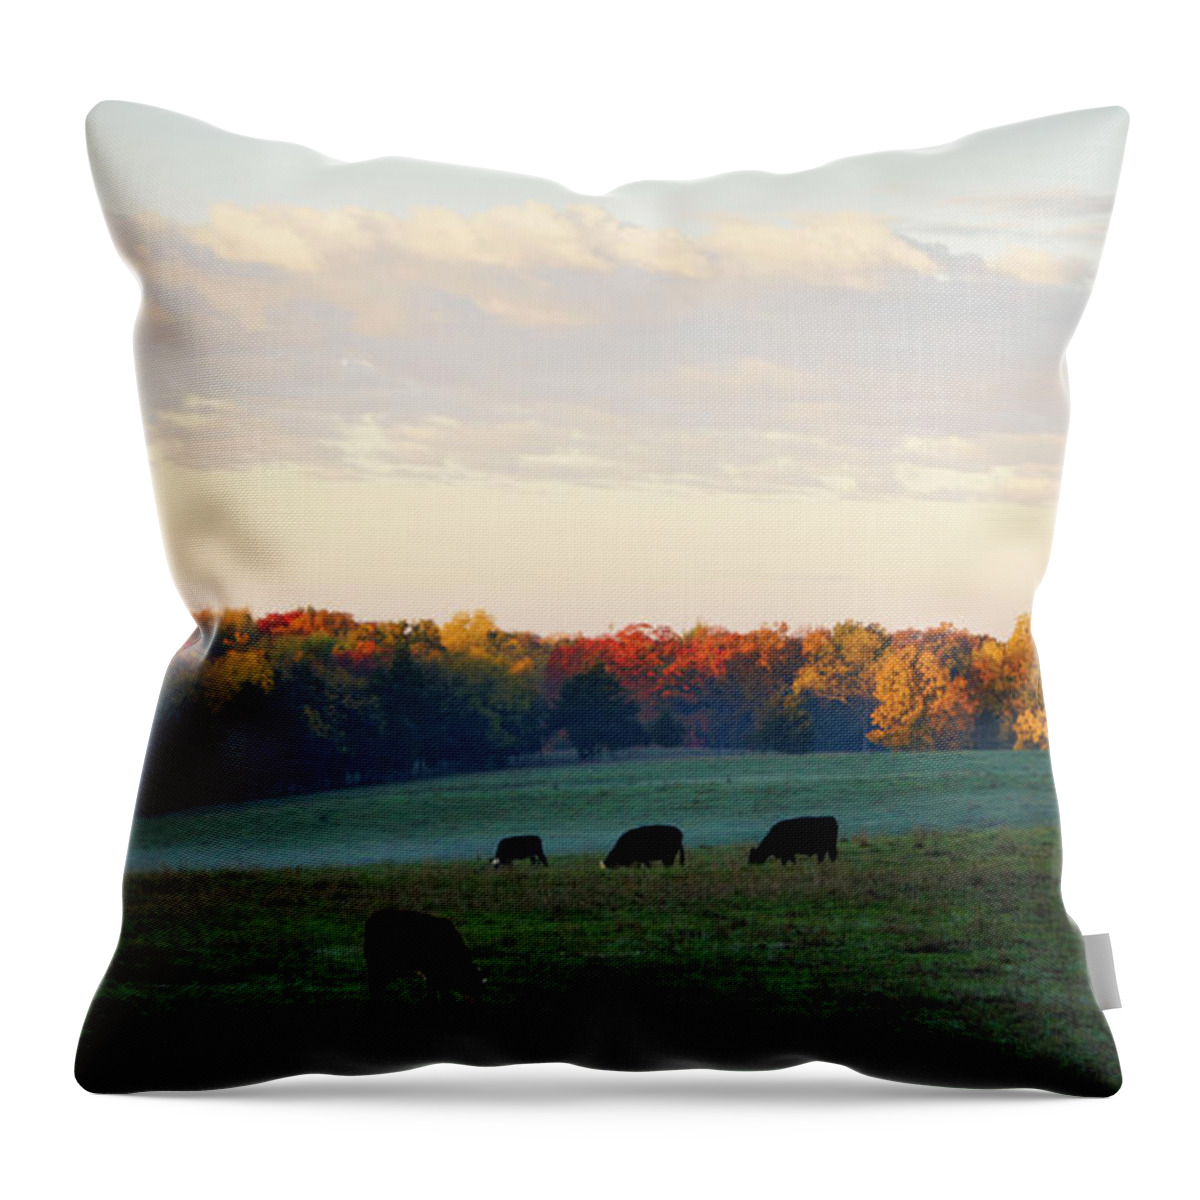 Cattle Throw Pillow featuring the photograph October Morning by Cricket Hackmann